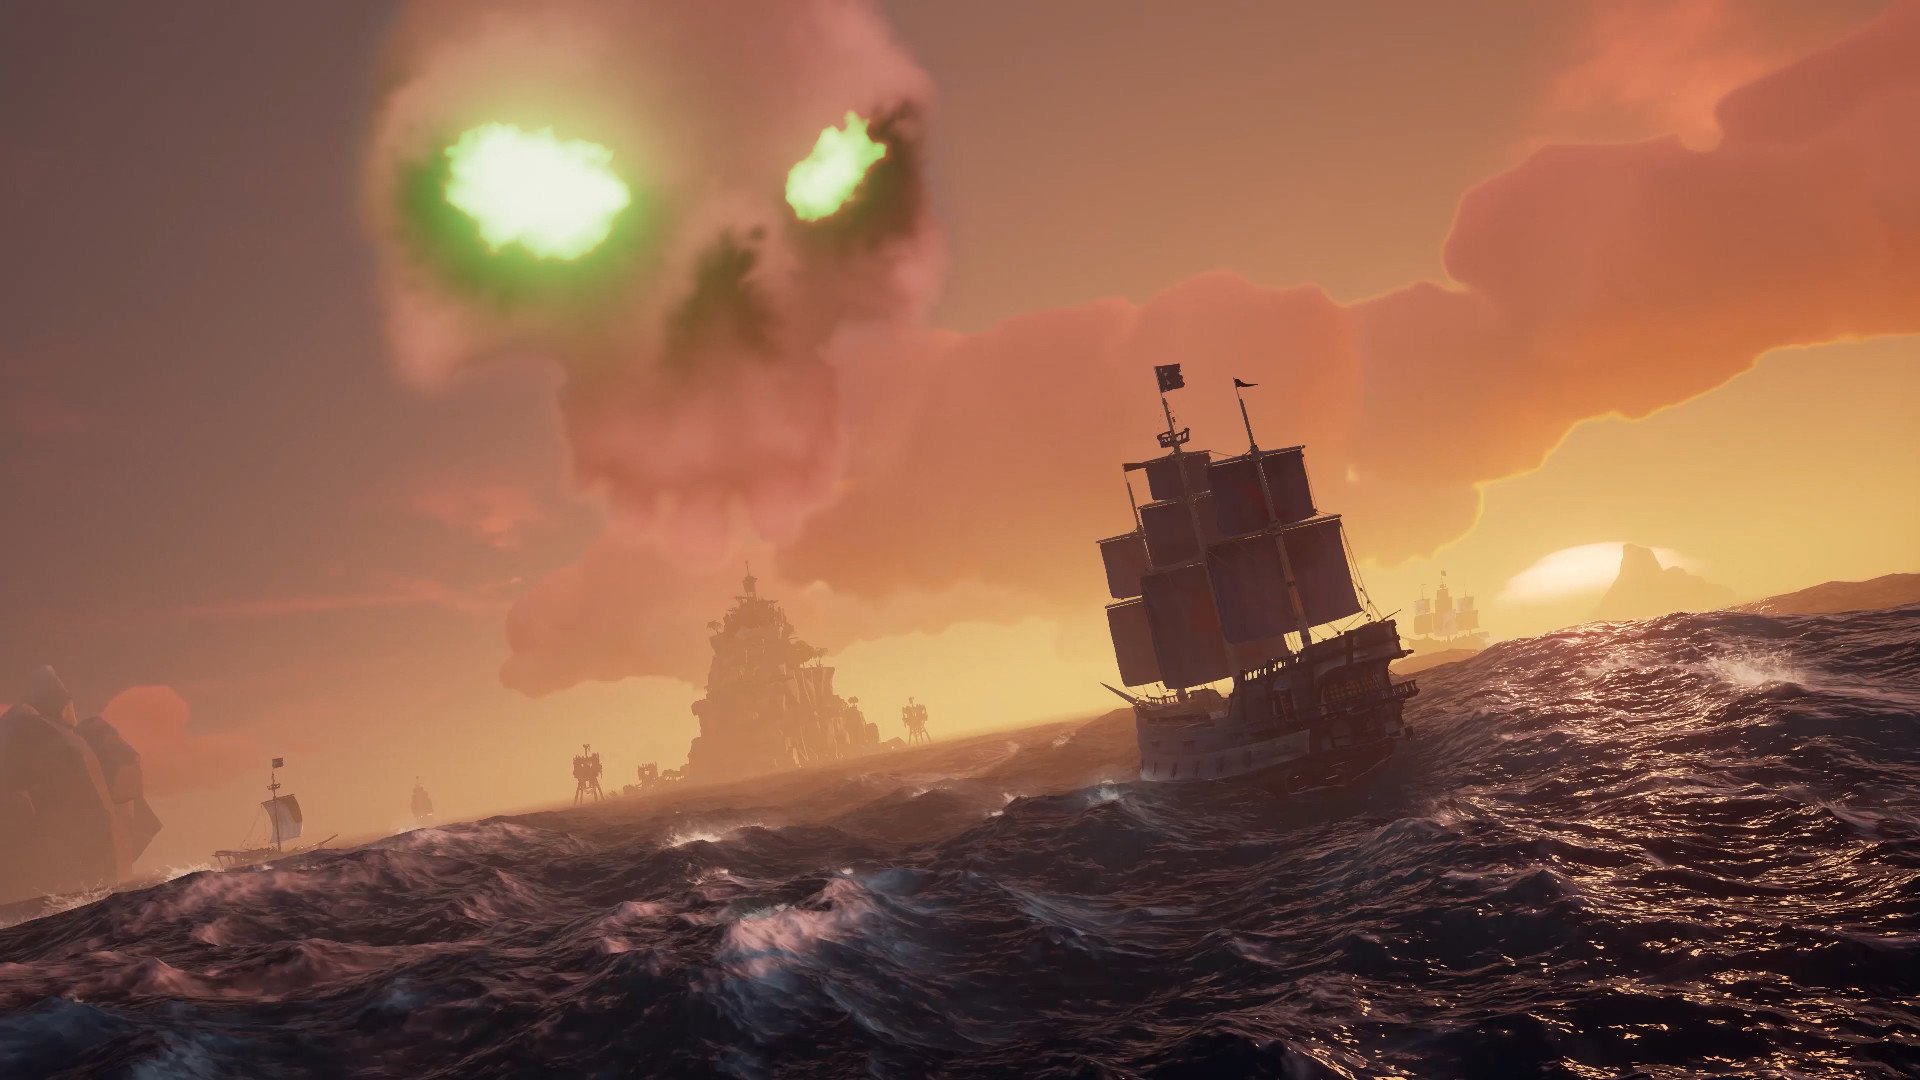 Xbox’s Sea of Thieves has topped PlayStation 5 digital pre-purchase charts